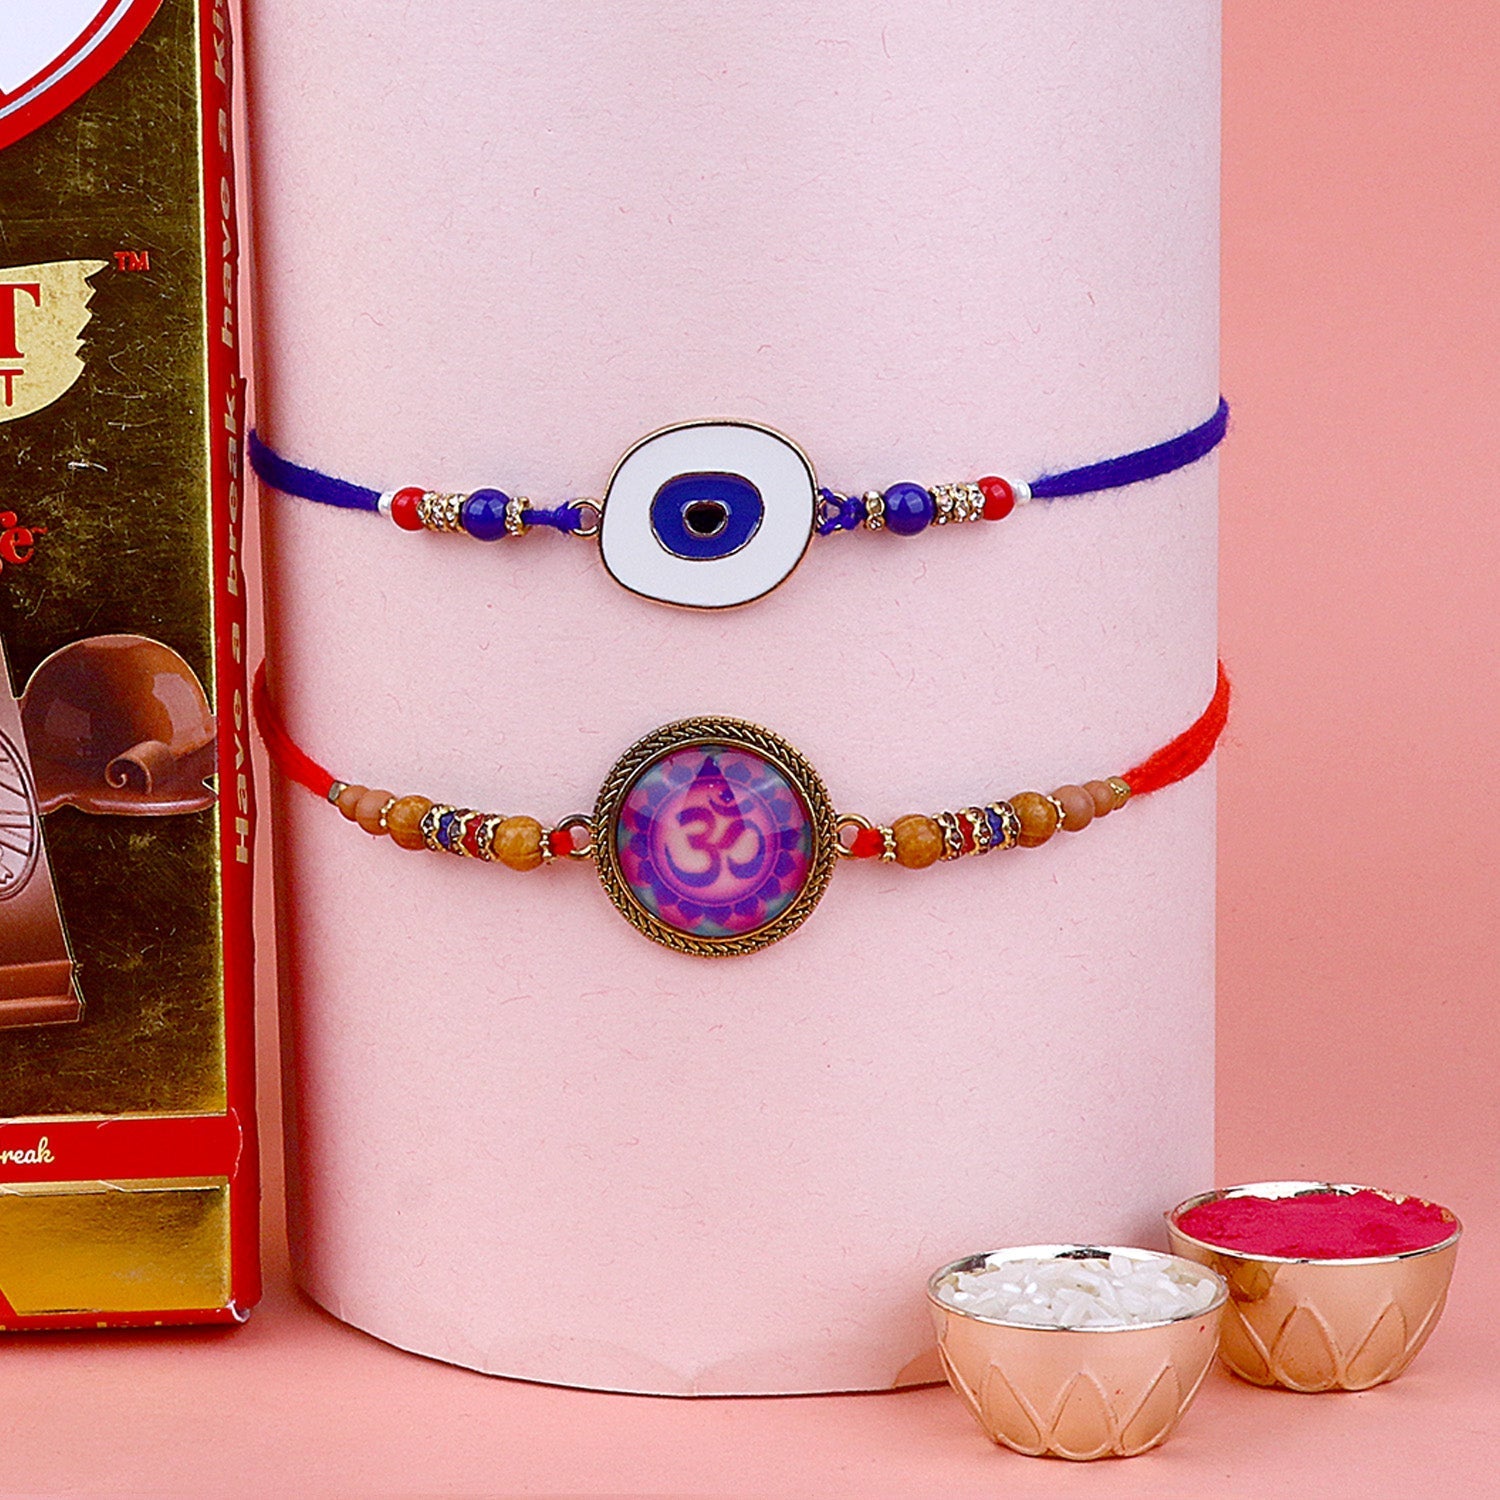 Chocolaty Siblings: Rakhi Paired with Luxurious Chocolates for a Festive Treat